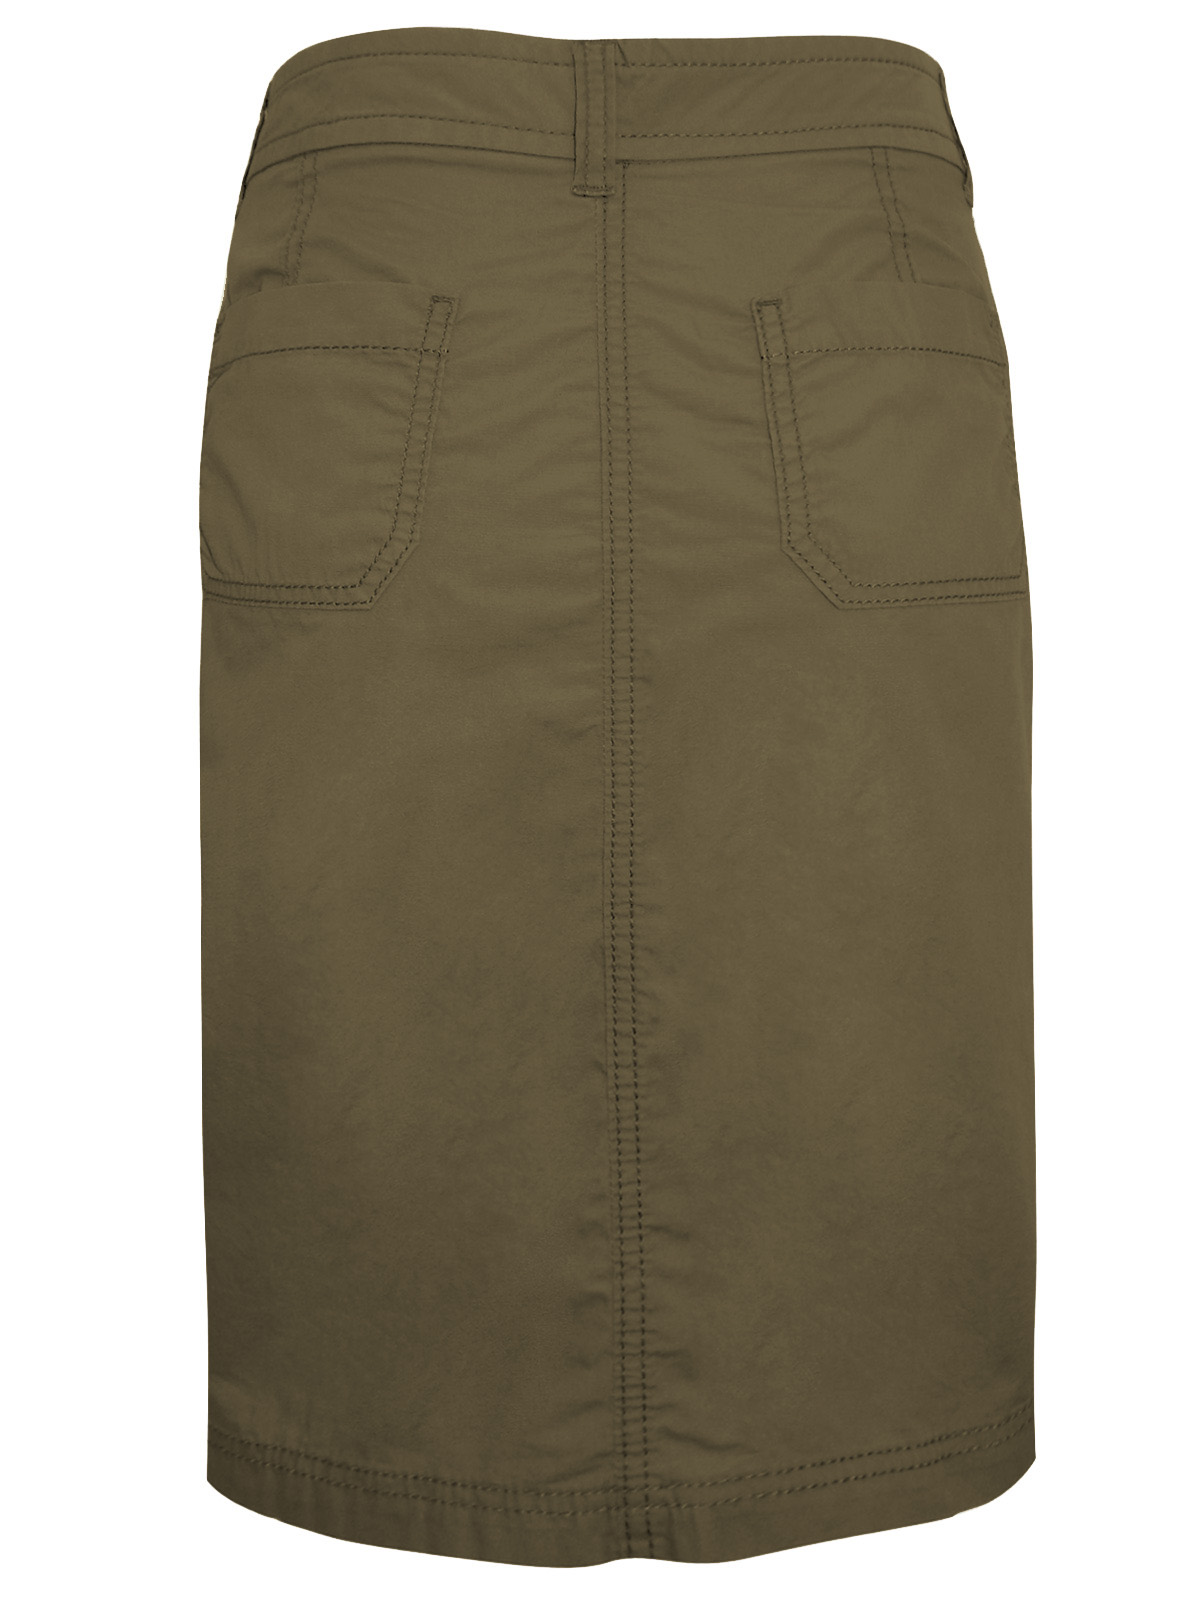 Marks and Spencer - - M&5 KHAKI Pure Cotton Cargo Skirt - Size 8 to 20